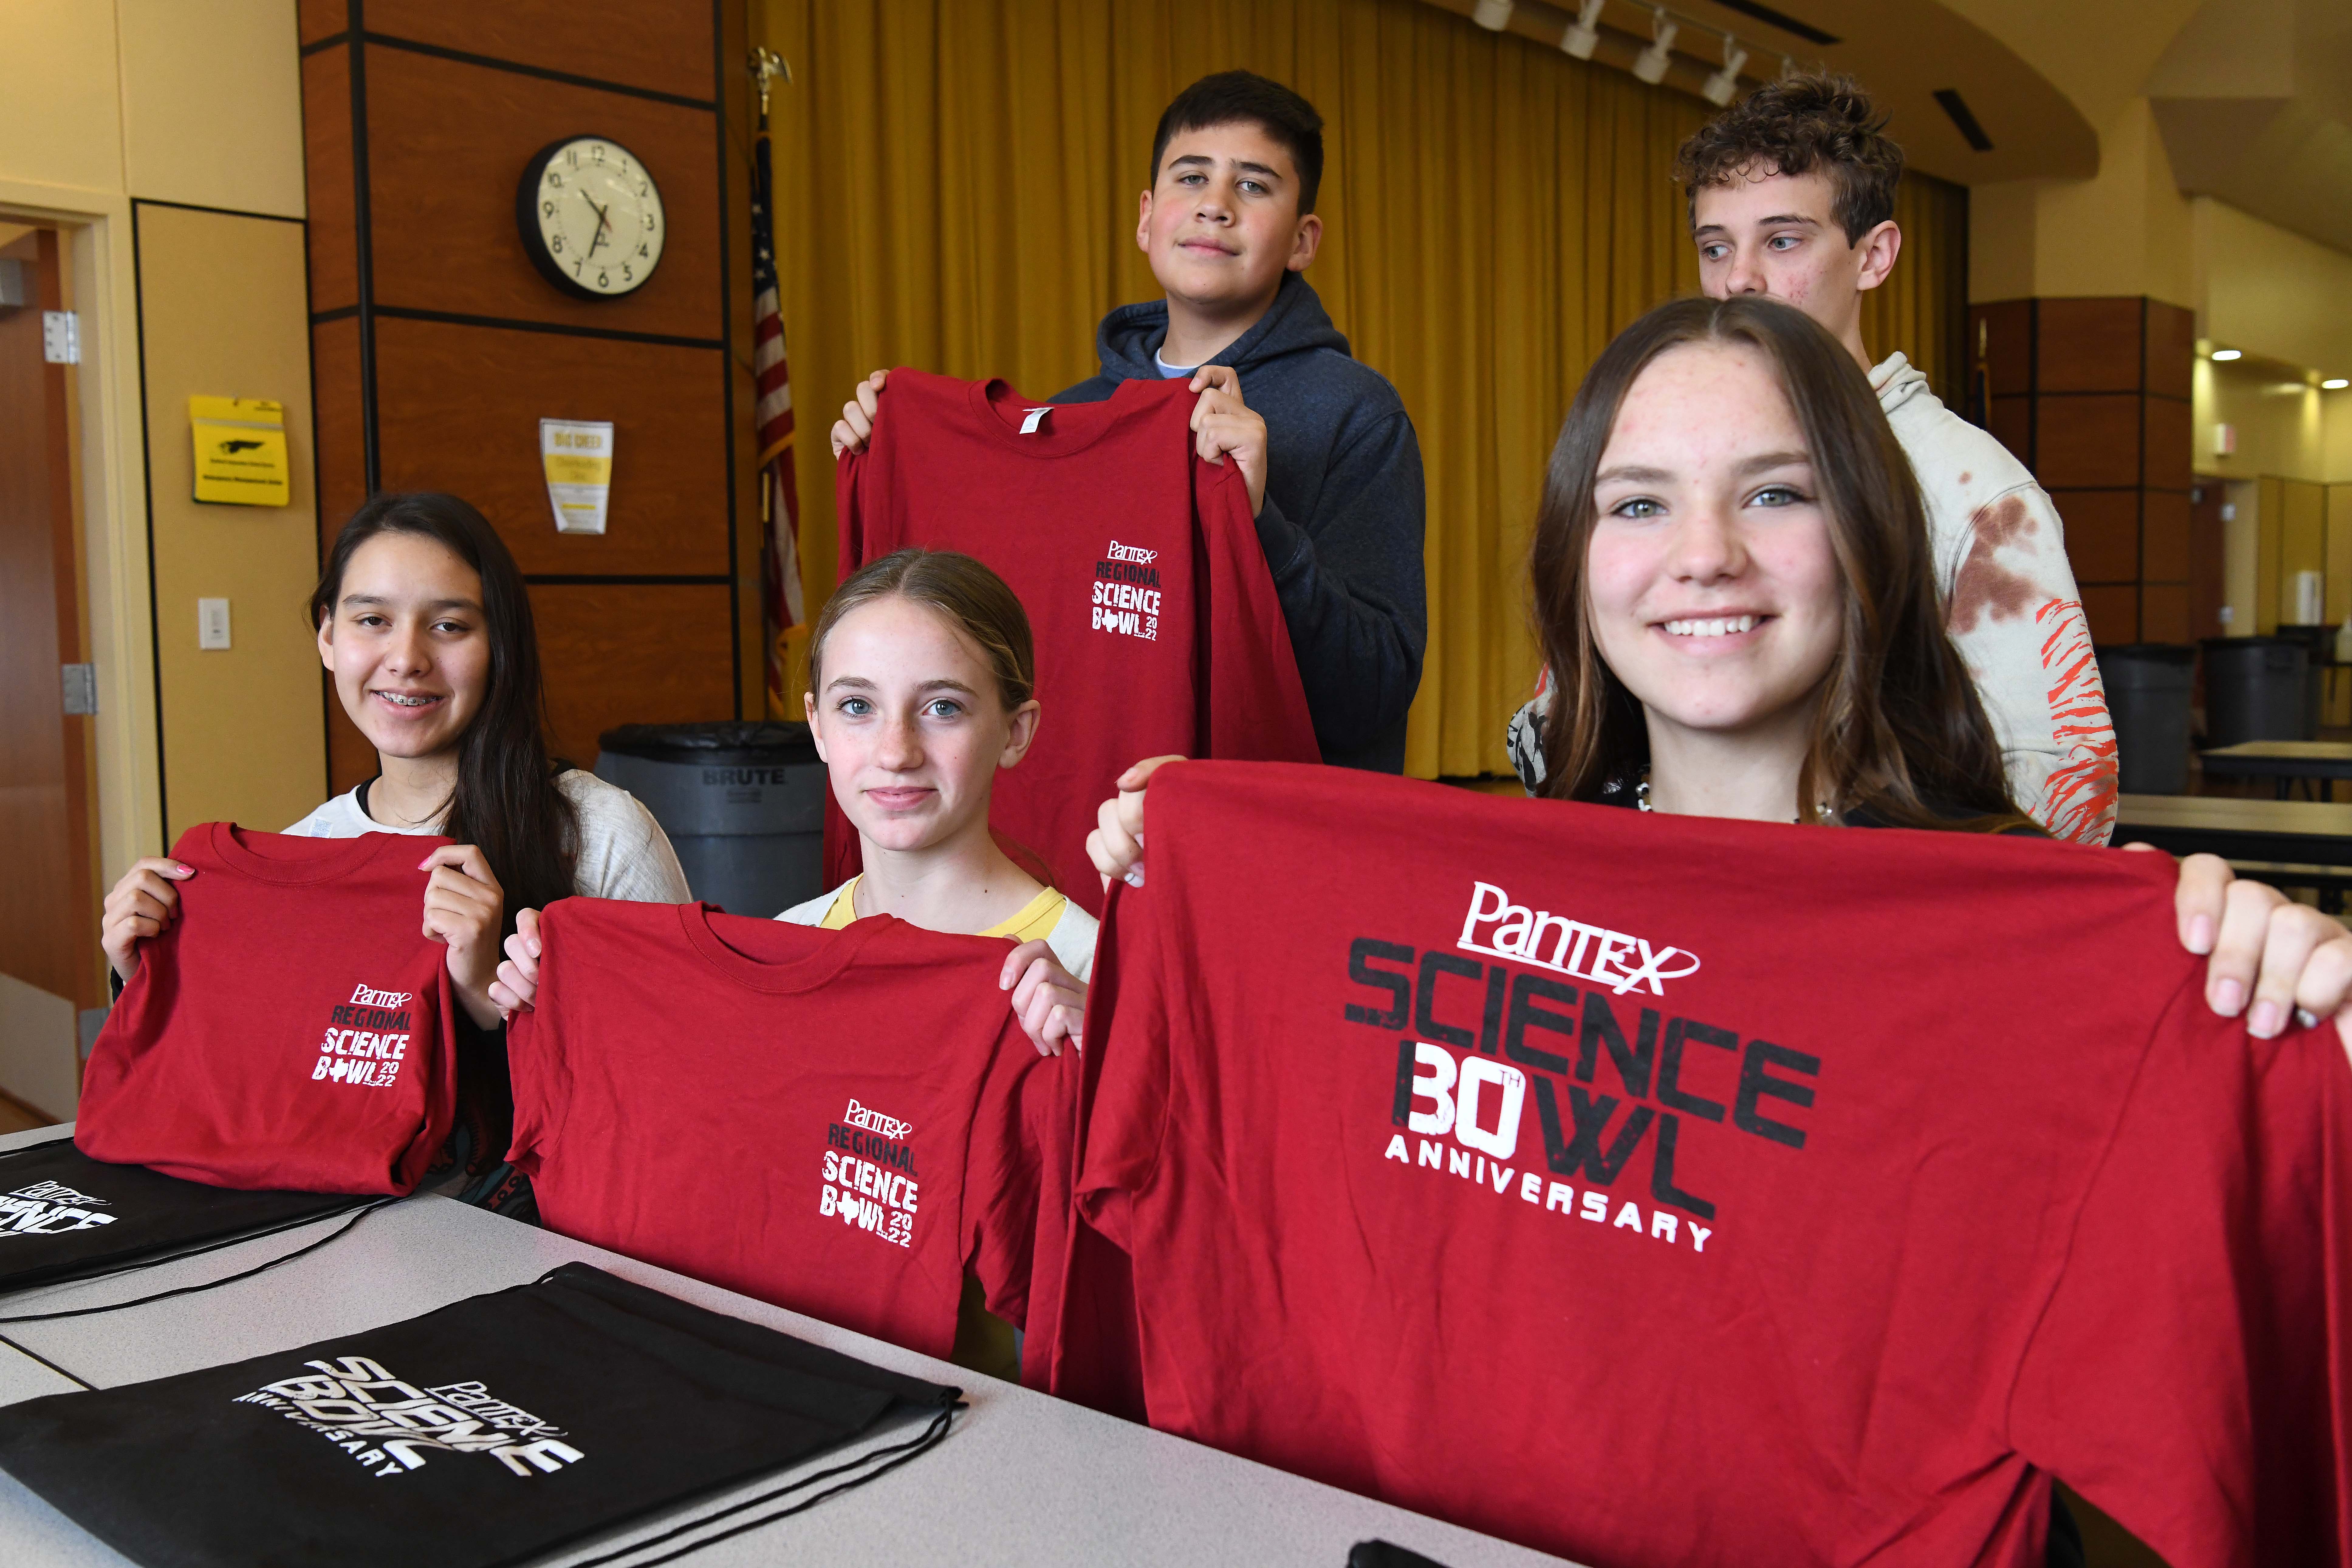 Bushland Middle School shows off their Pantex Science Bowl 30th anniversary shirts and bags